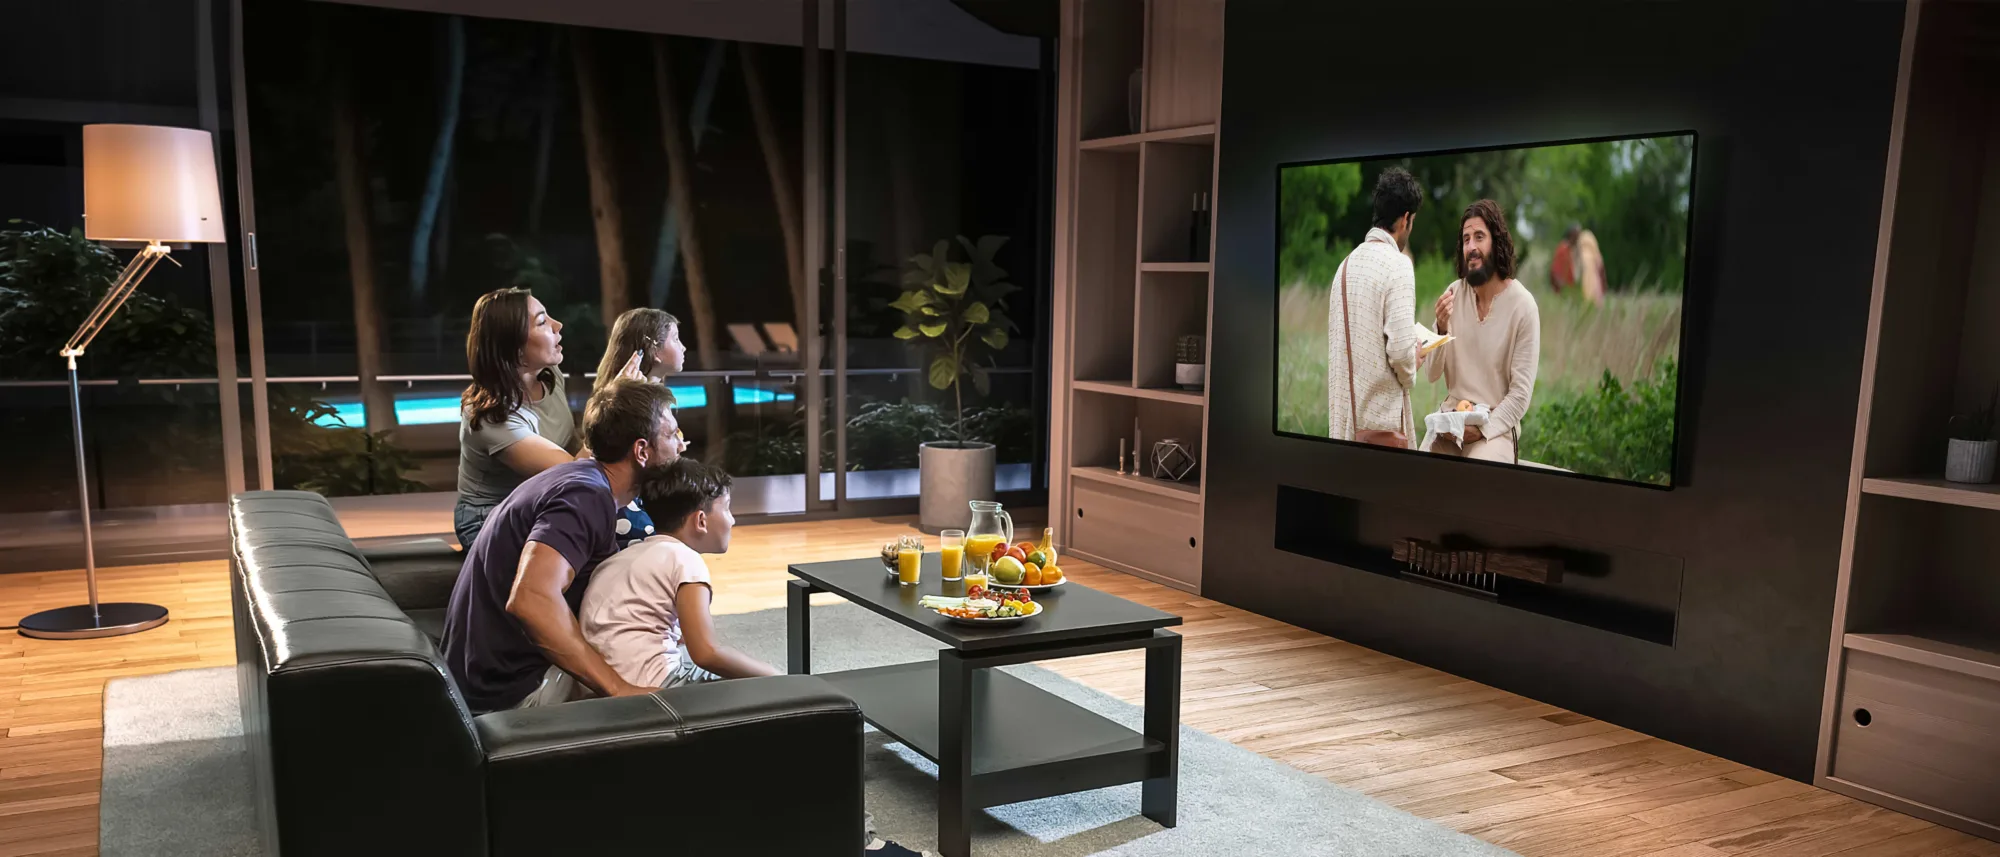 How to Watch "The Chosen" Drama On Your Smart TV? 1